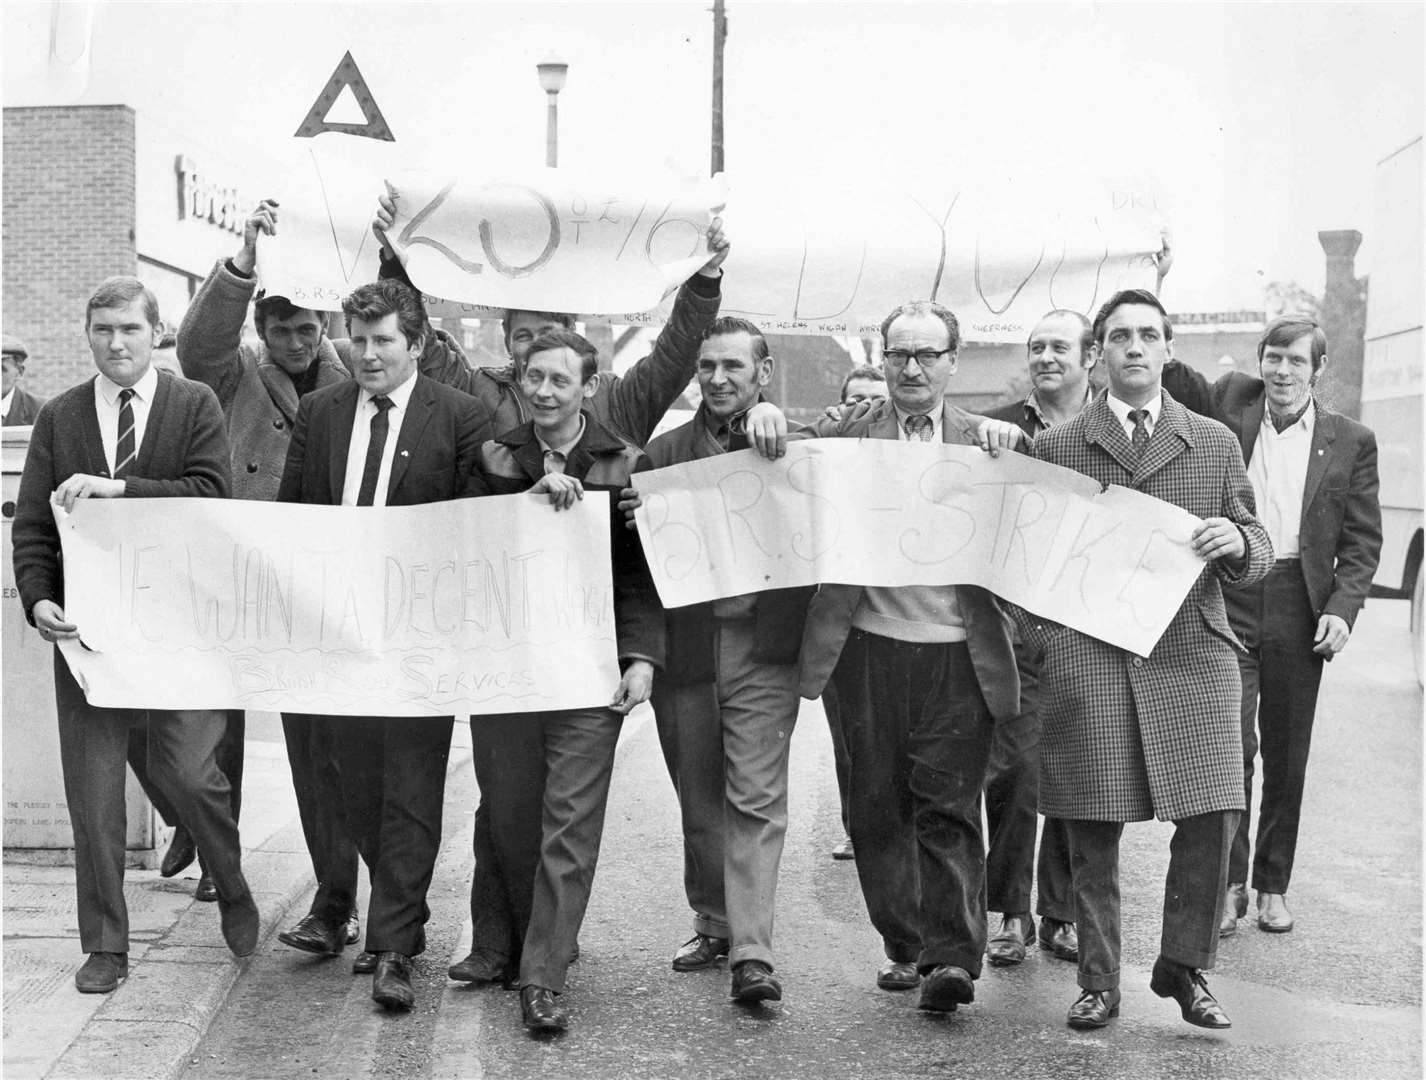 British Road Services drivers marching through Strood in 1970. They had been on strike for higher wages